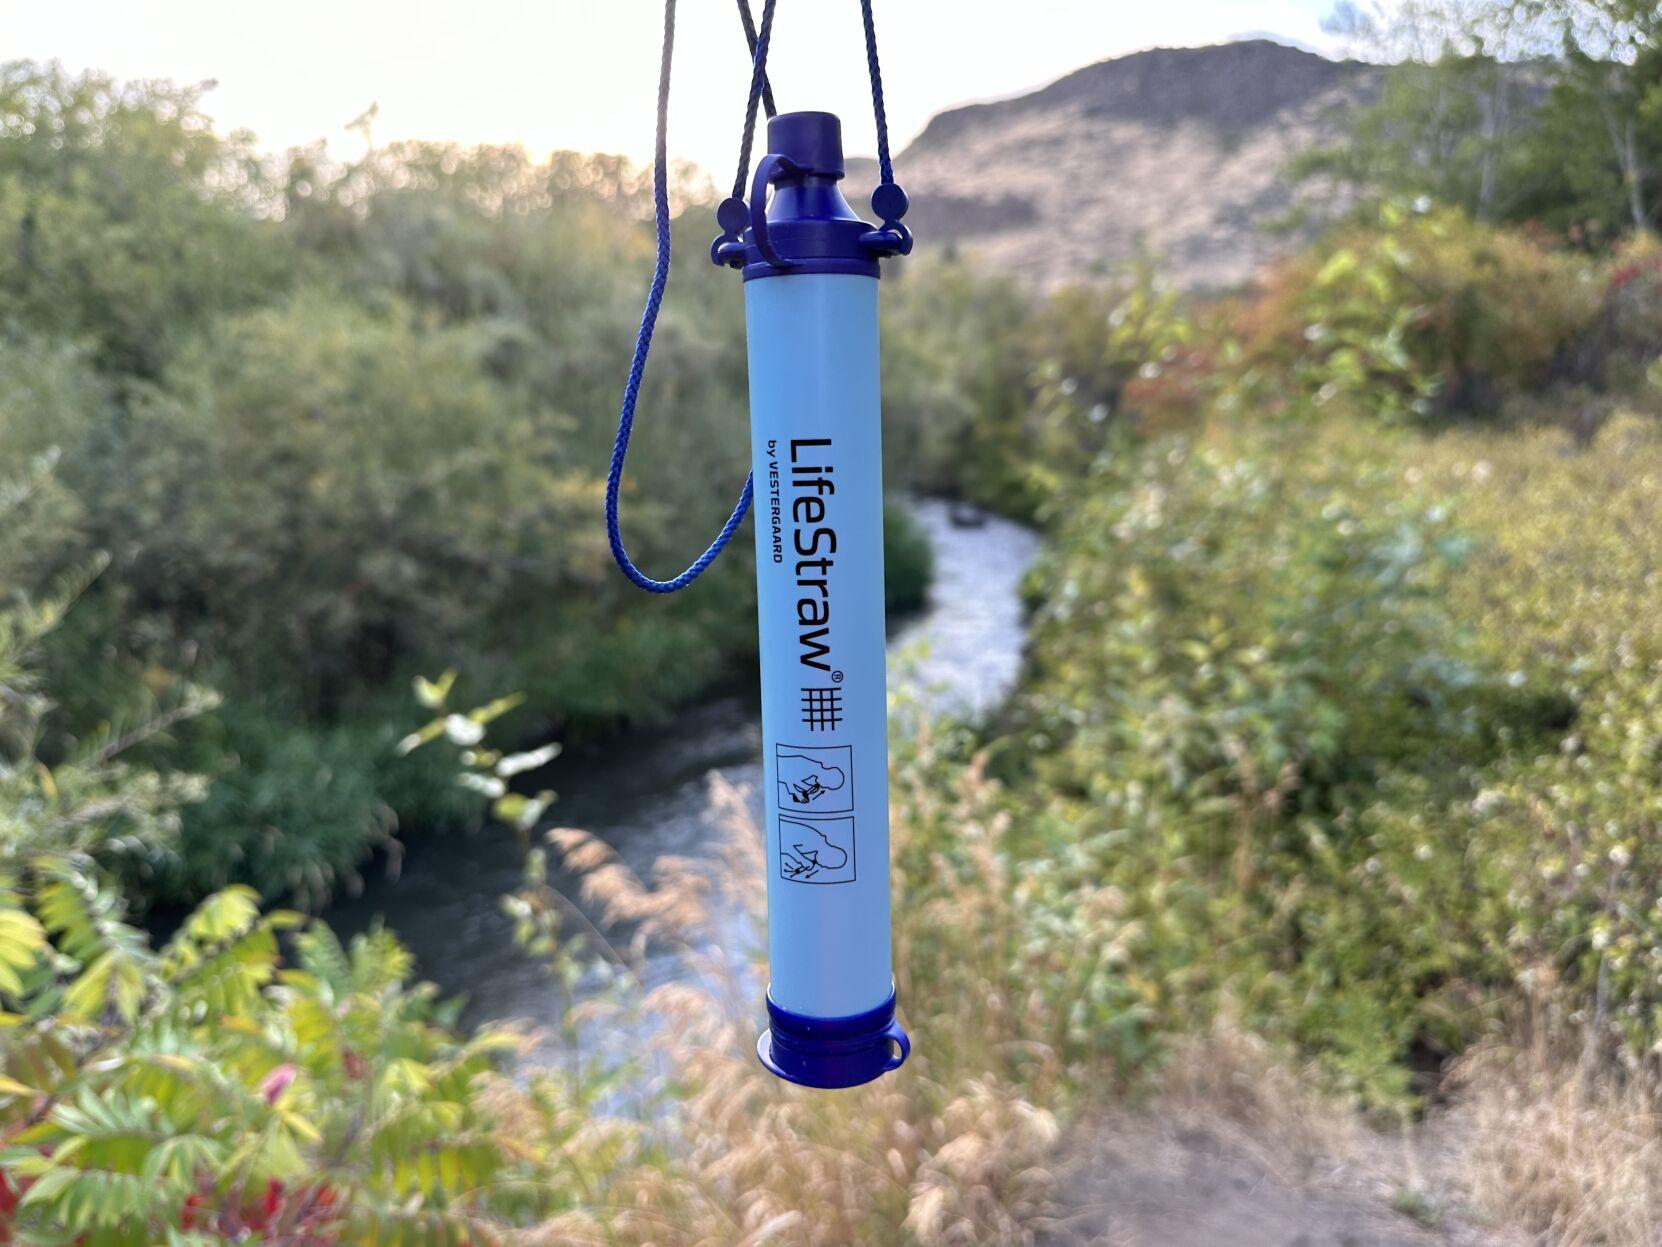 LifeStraw Saves Those Without Access to Clean Drinking Water - The New York  Times